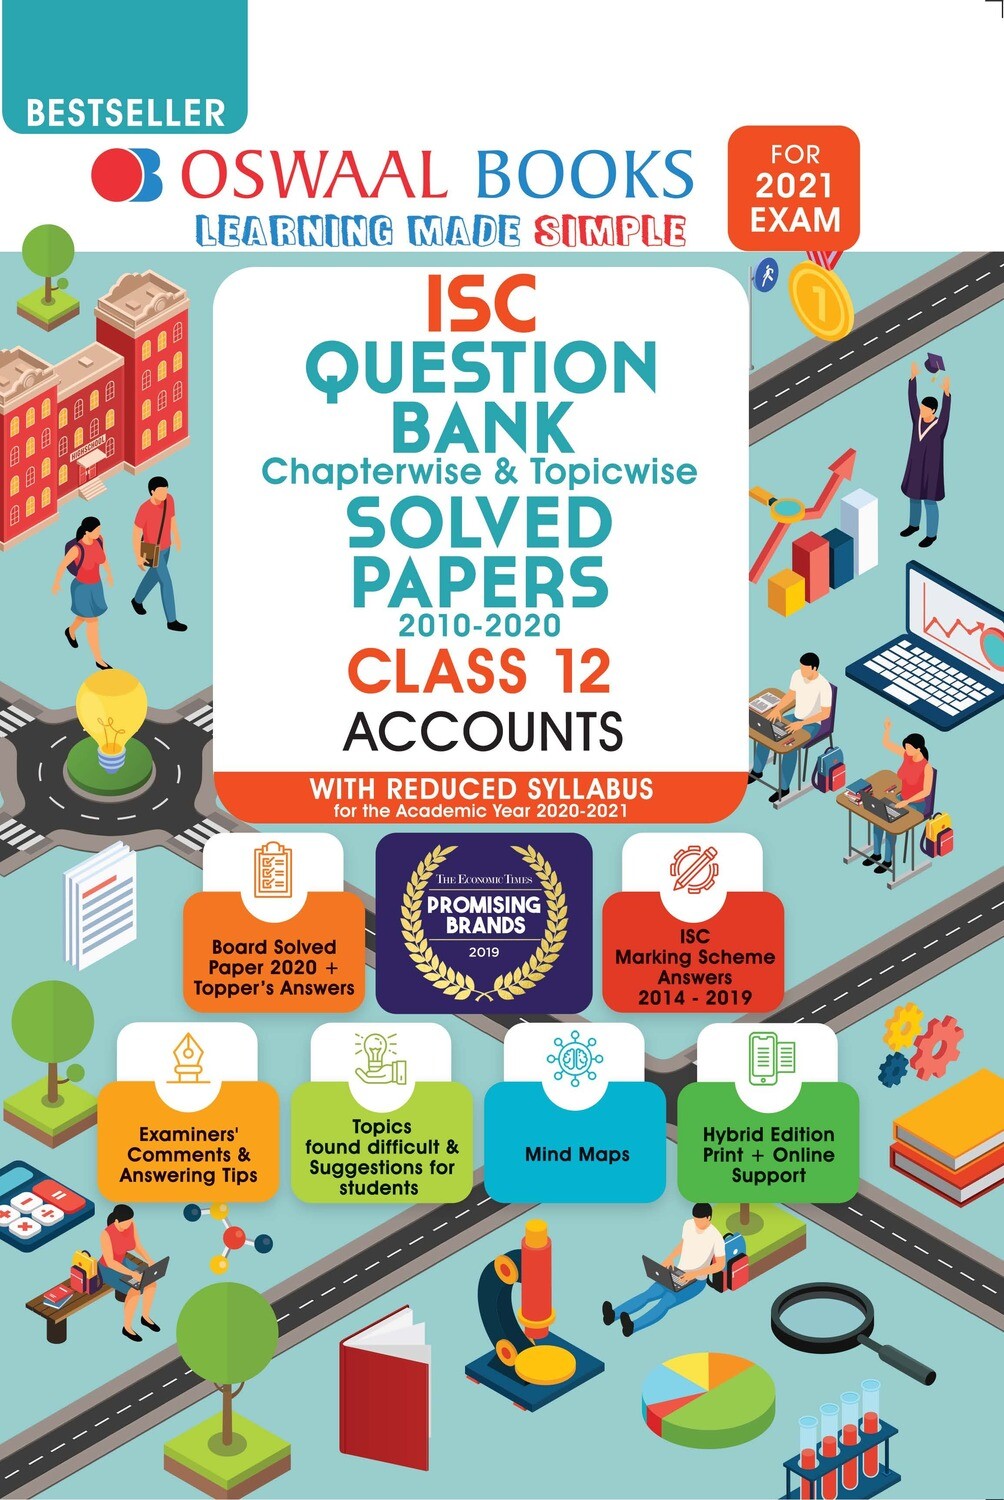 Buy e-book: Oswaal ISC Question Bank Chapterwise & Topicwise Solved Papers, Accounts, Class 12 (Reduced Syllabus